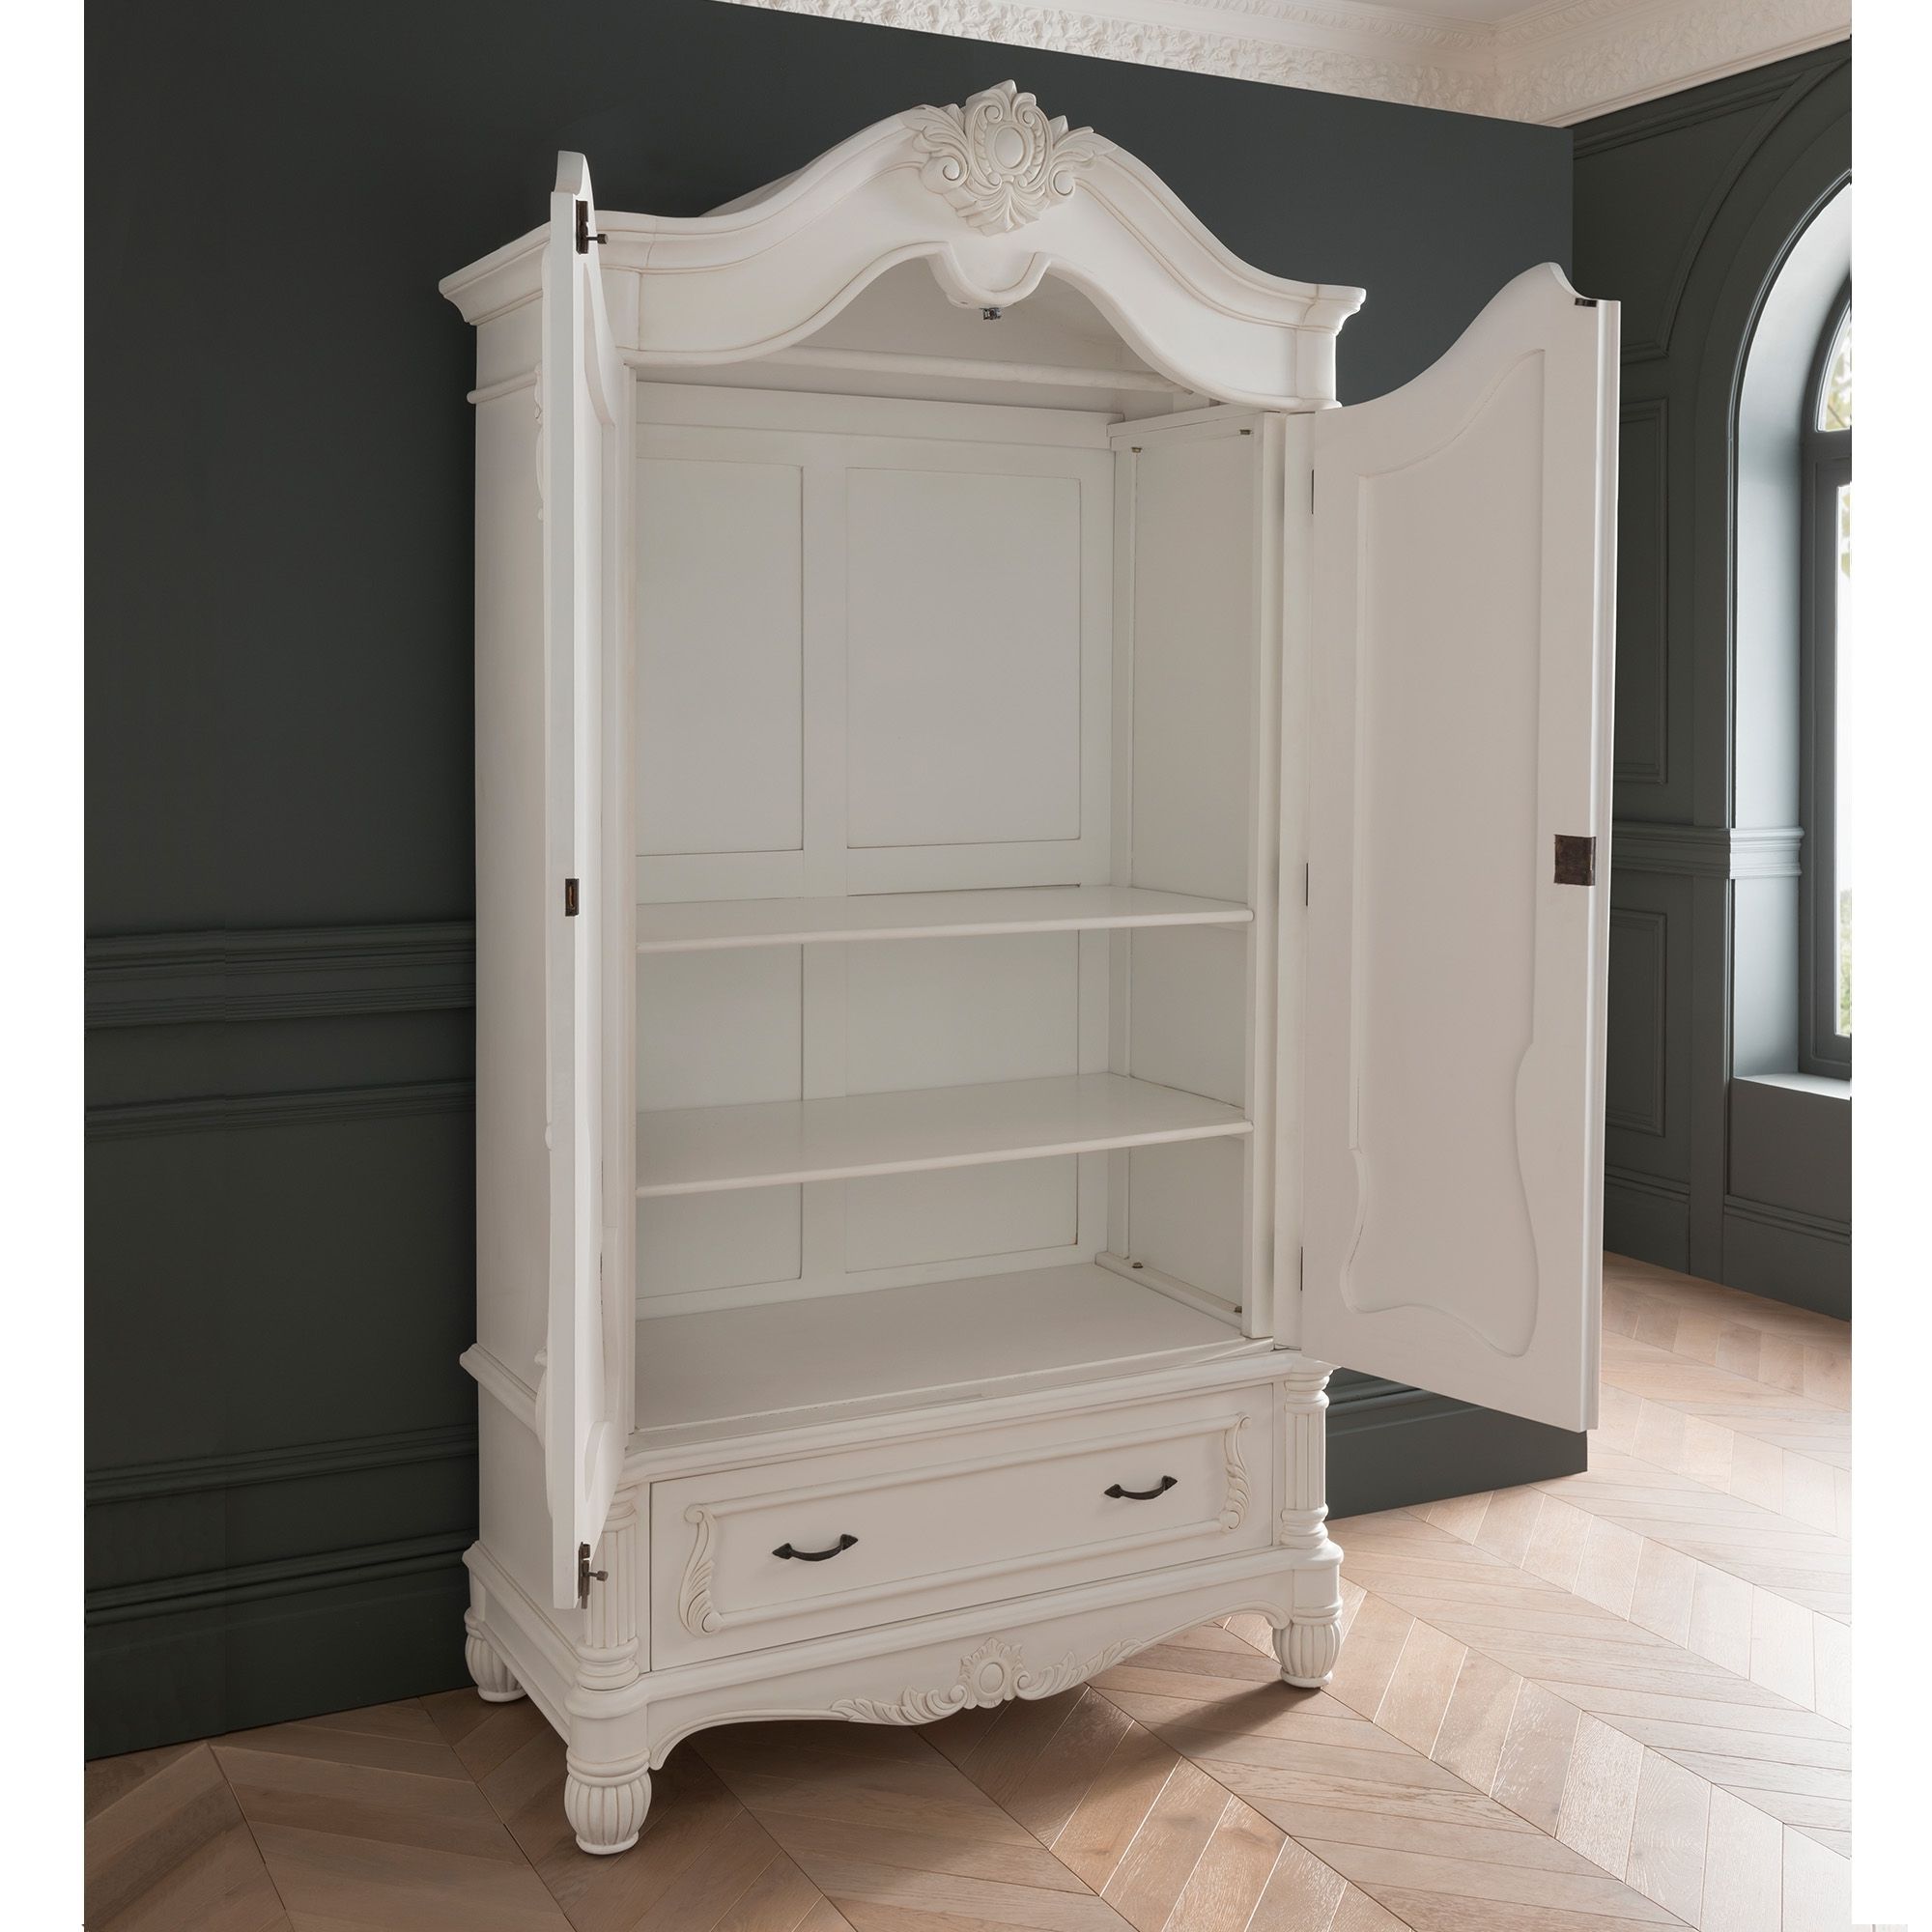 Antique French Style White Finished 1 Drawer Wardrobe | Homesdirect365 Inside French Style White Wardrobes (View 3 of 20)